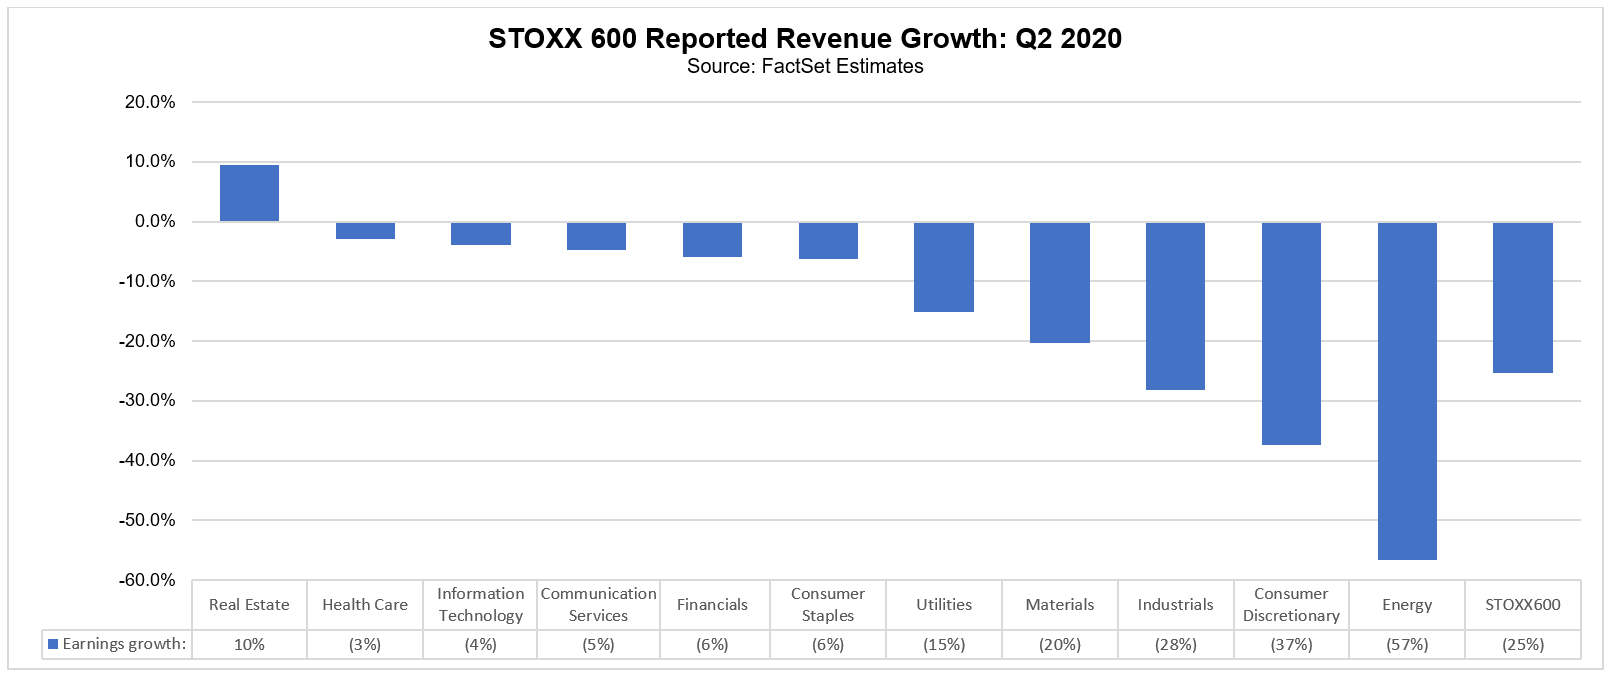 STOXX 600 reported revenue growth Q2 2020